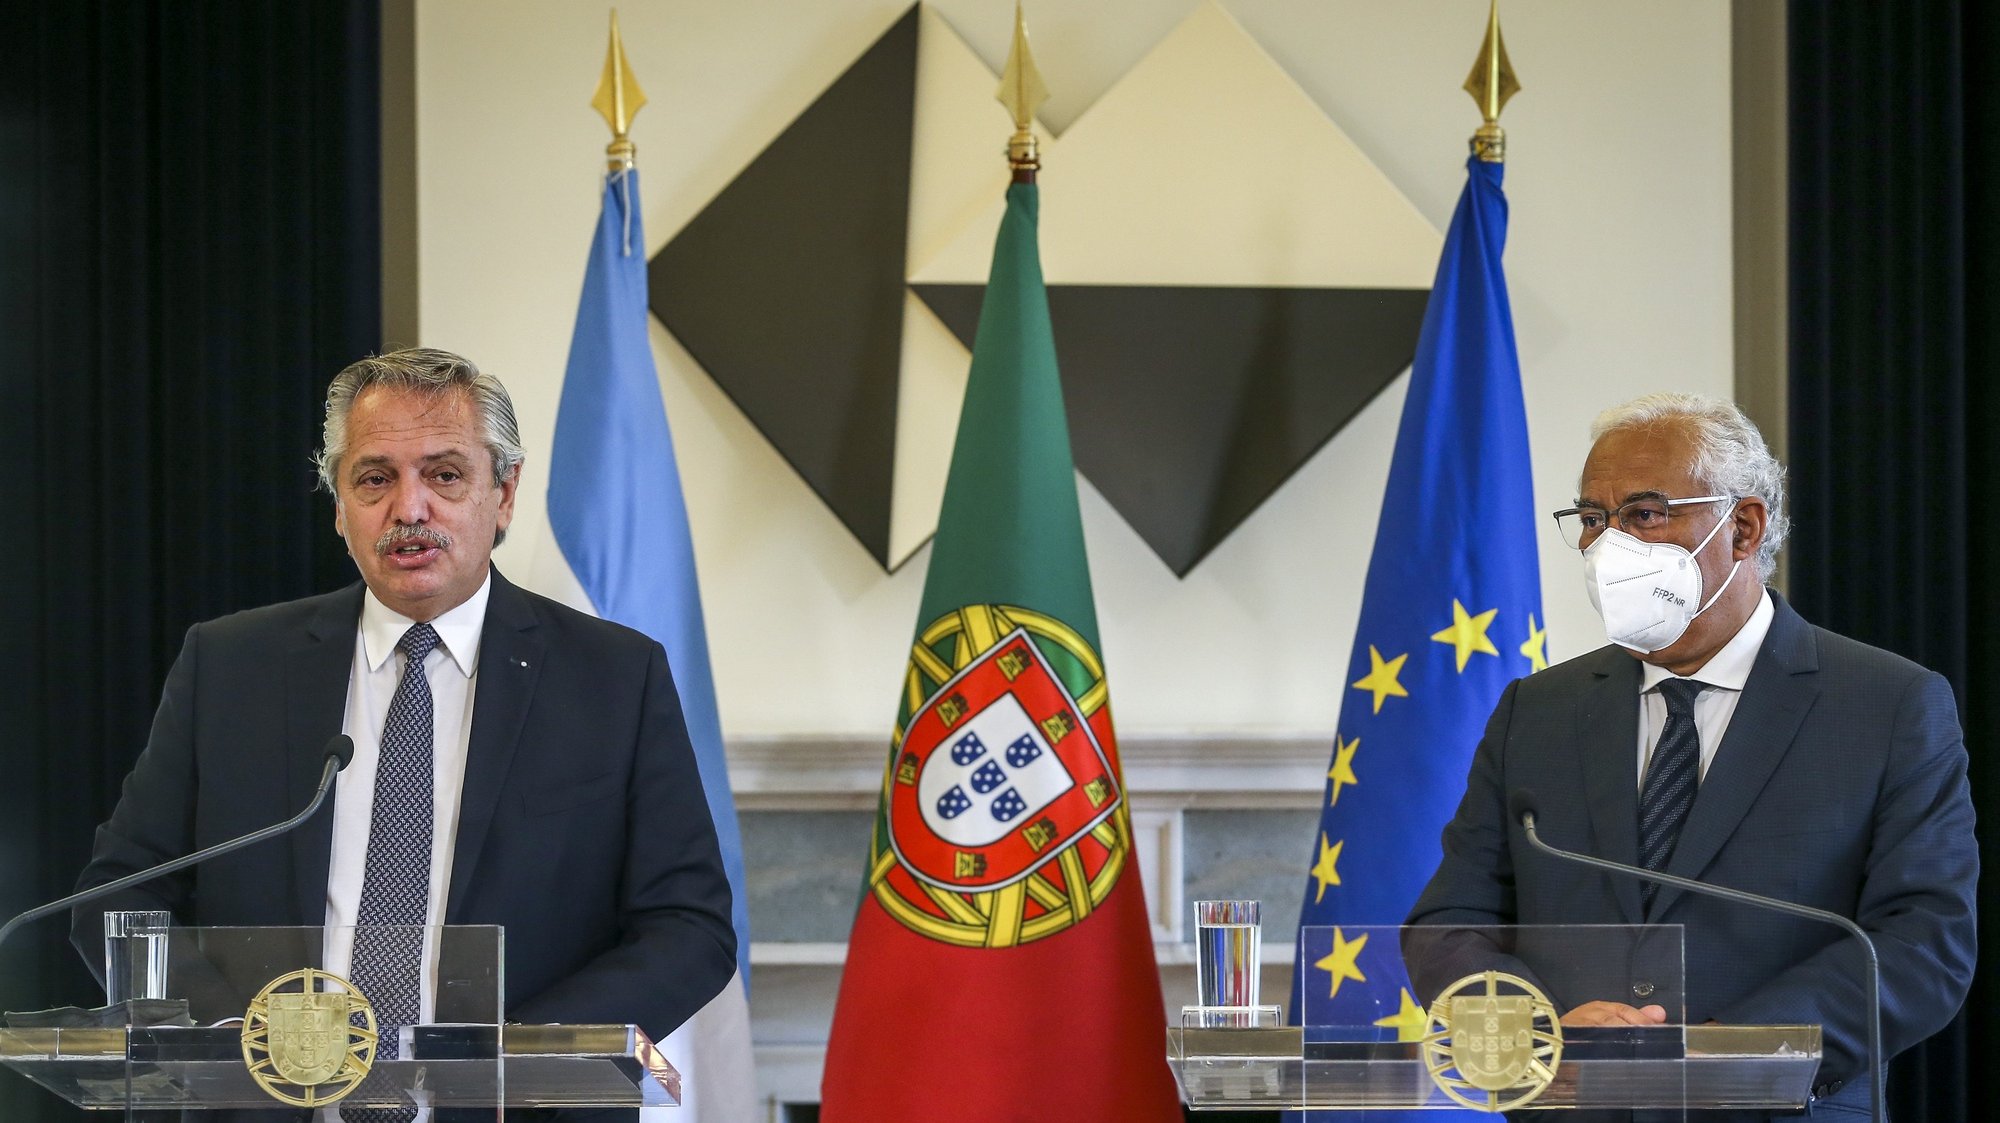 Argentine President Alberto Fernandez (L) and Portuguese Prime Minister Antonio Costa (R) attend a press conference at the end of a meeting at Sao Bento Palace in Lisbon, Portugal, 10 May 2021. RODRIGO ANTUNES/LUSA